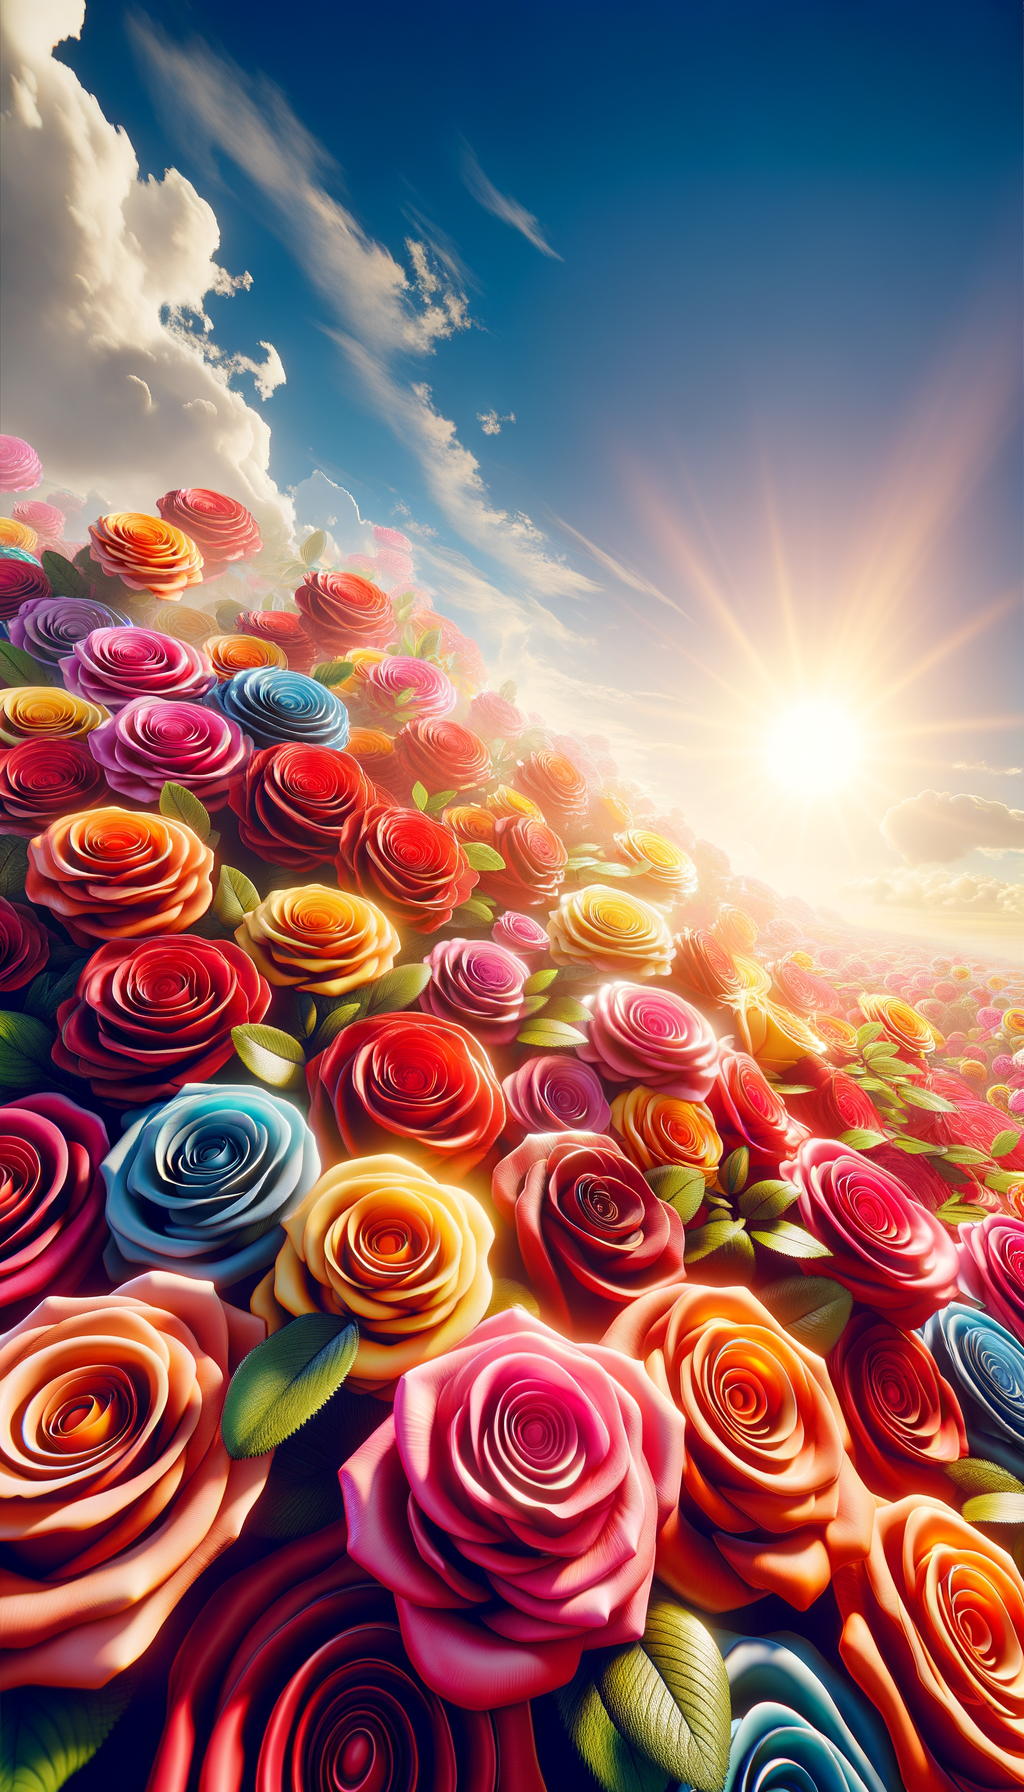 a large bouquet of roses, in the background there is a blue sky and the sun is shining